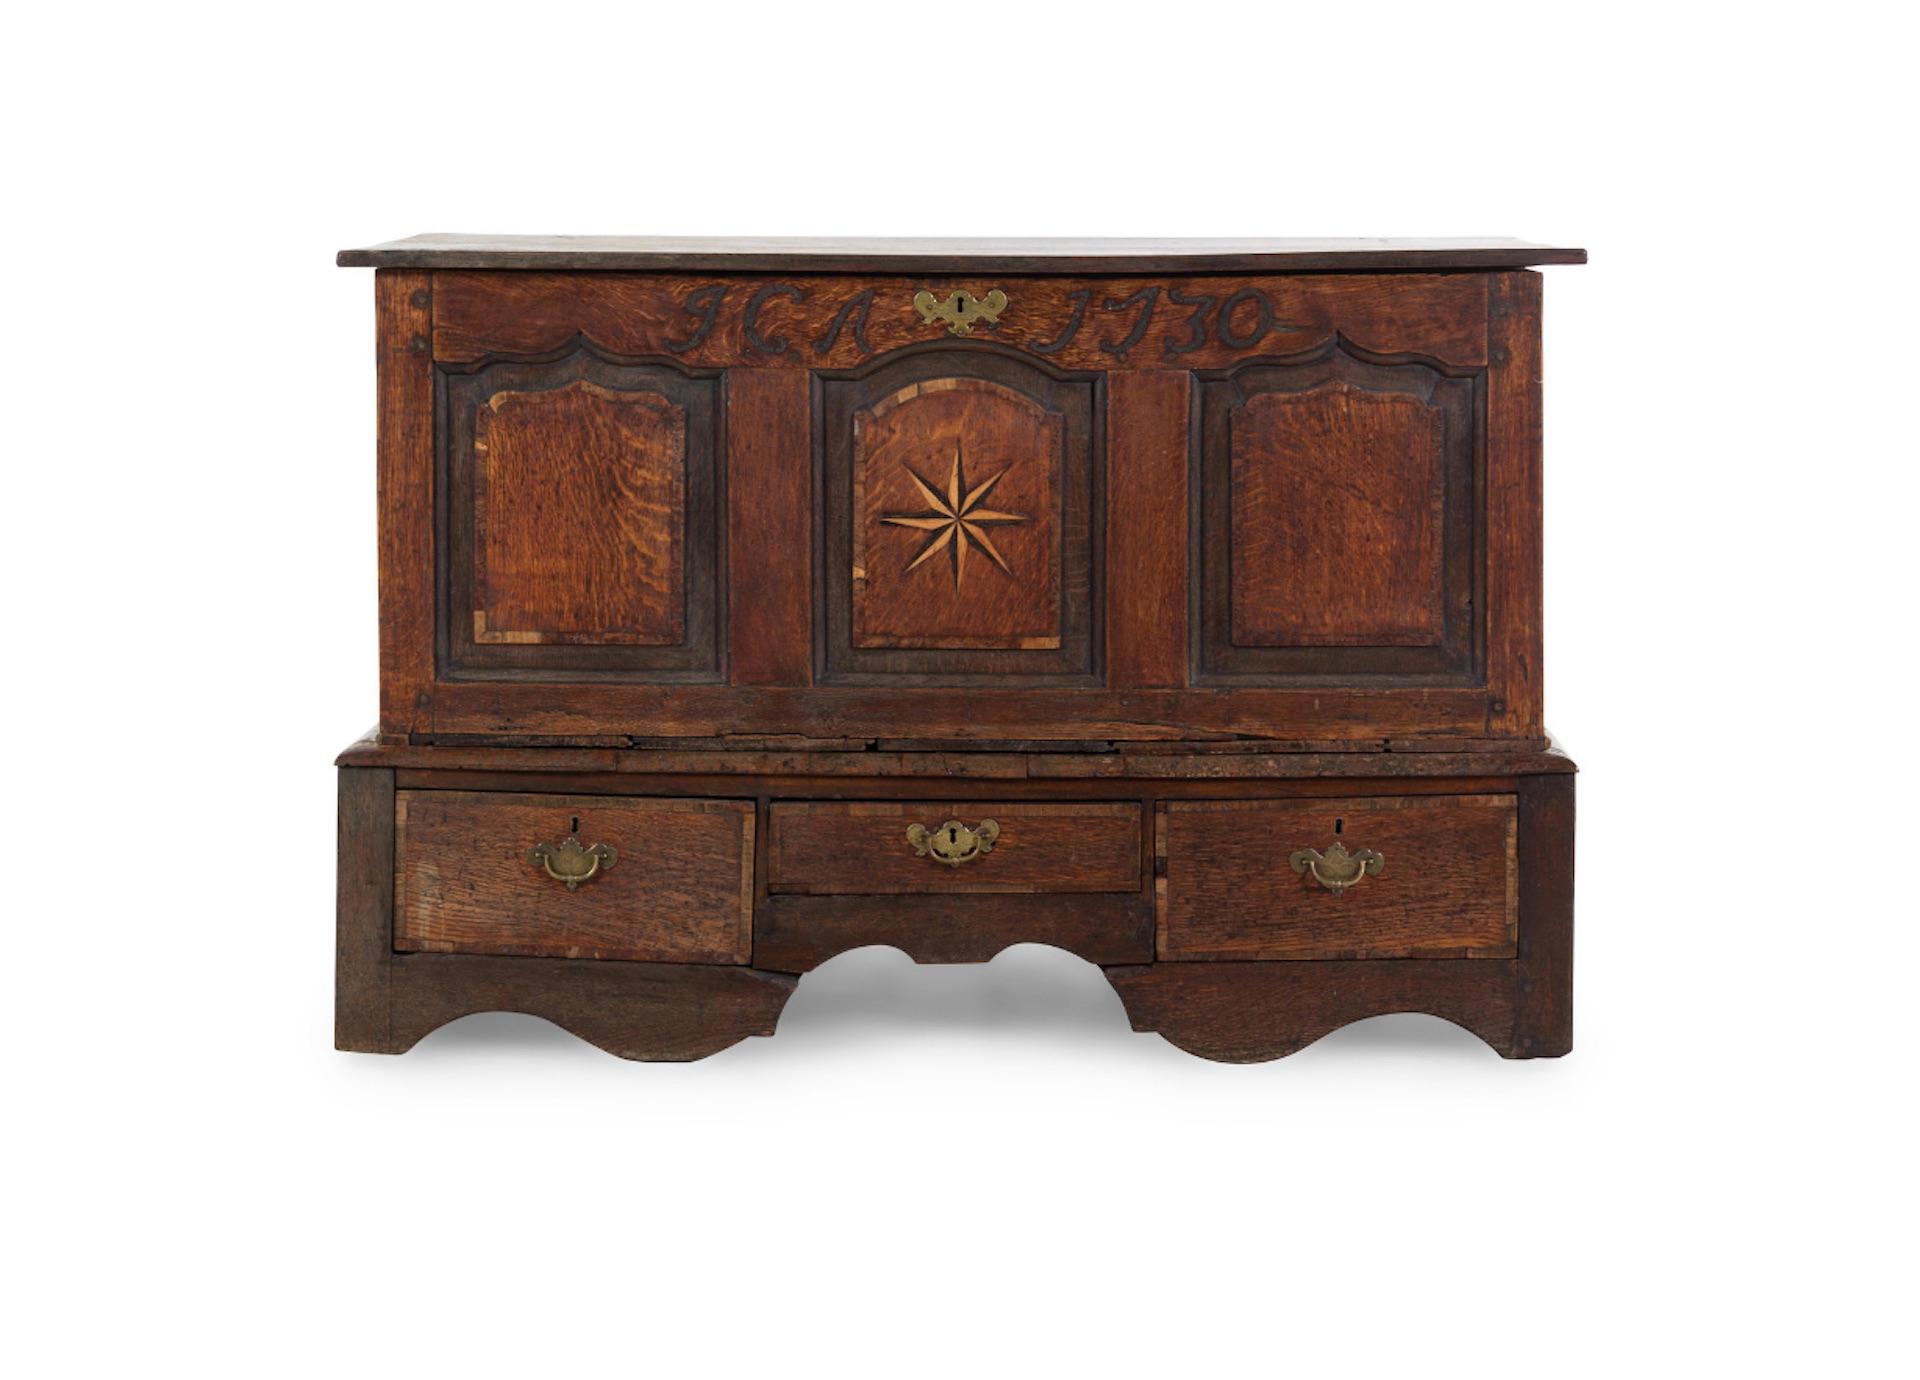 Handsome 18th century English oak chest with star inlay, dated 1730. Great patina and color, lift top over three drawers.